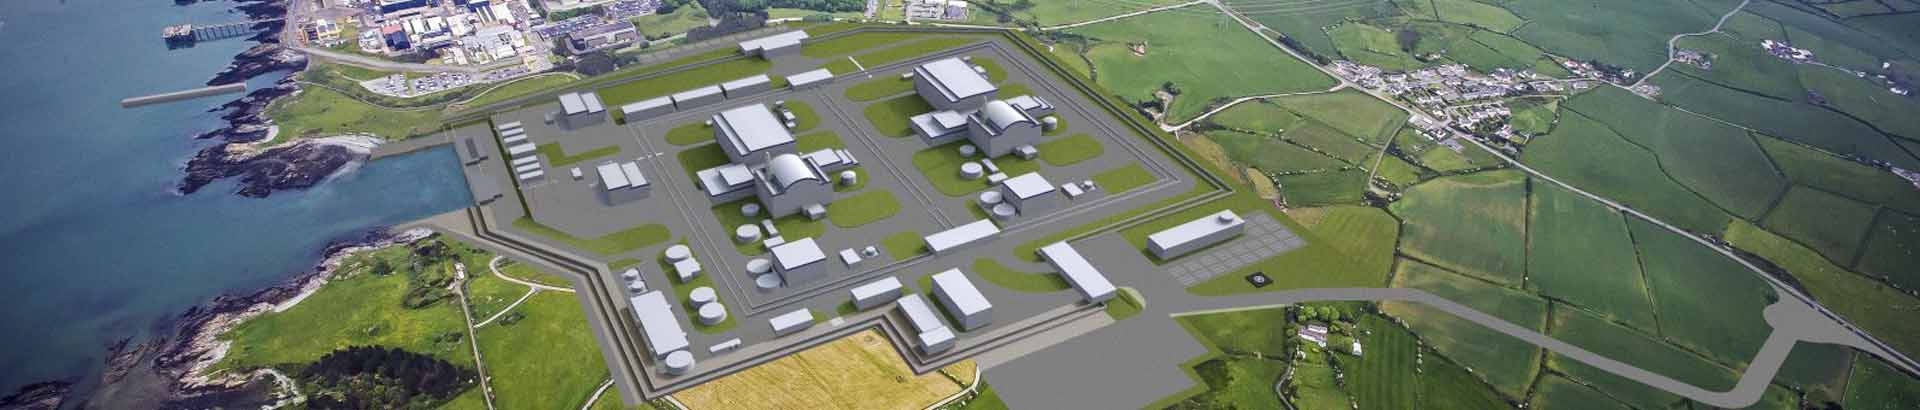 A rendering of the nuclear plant’s site